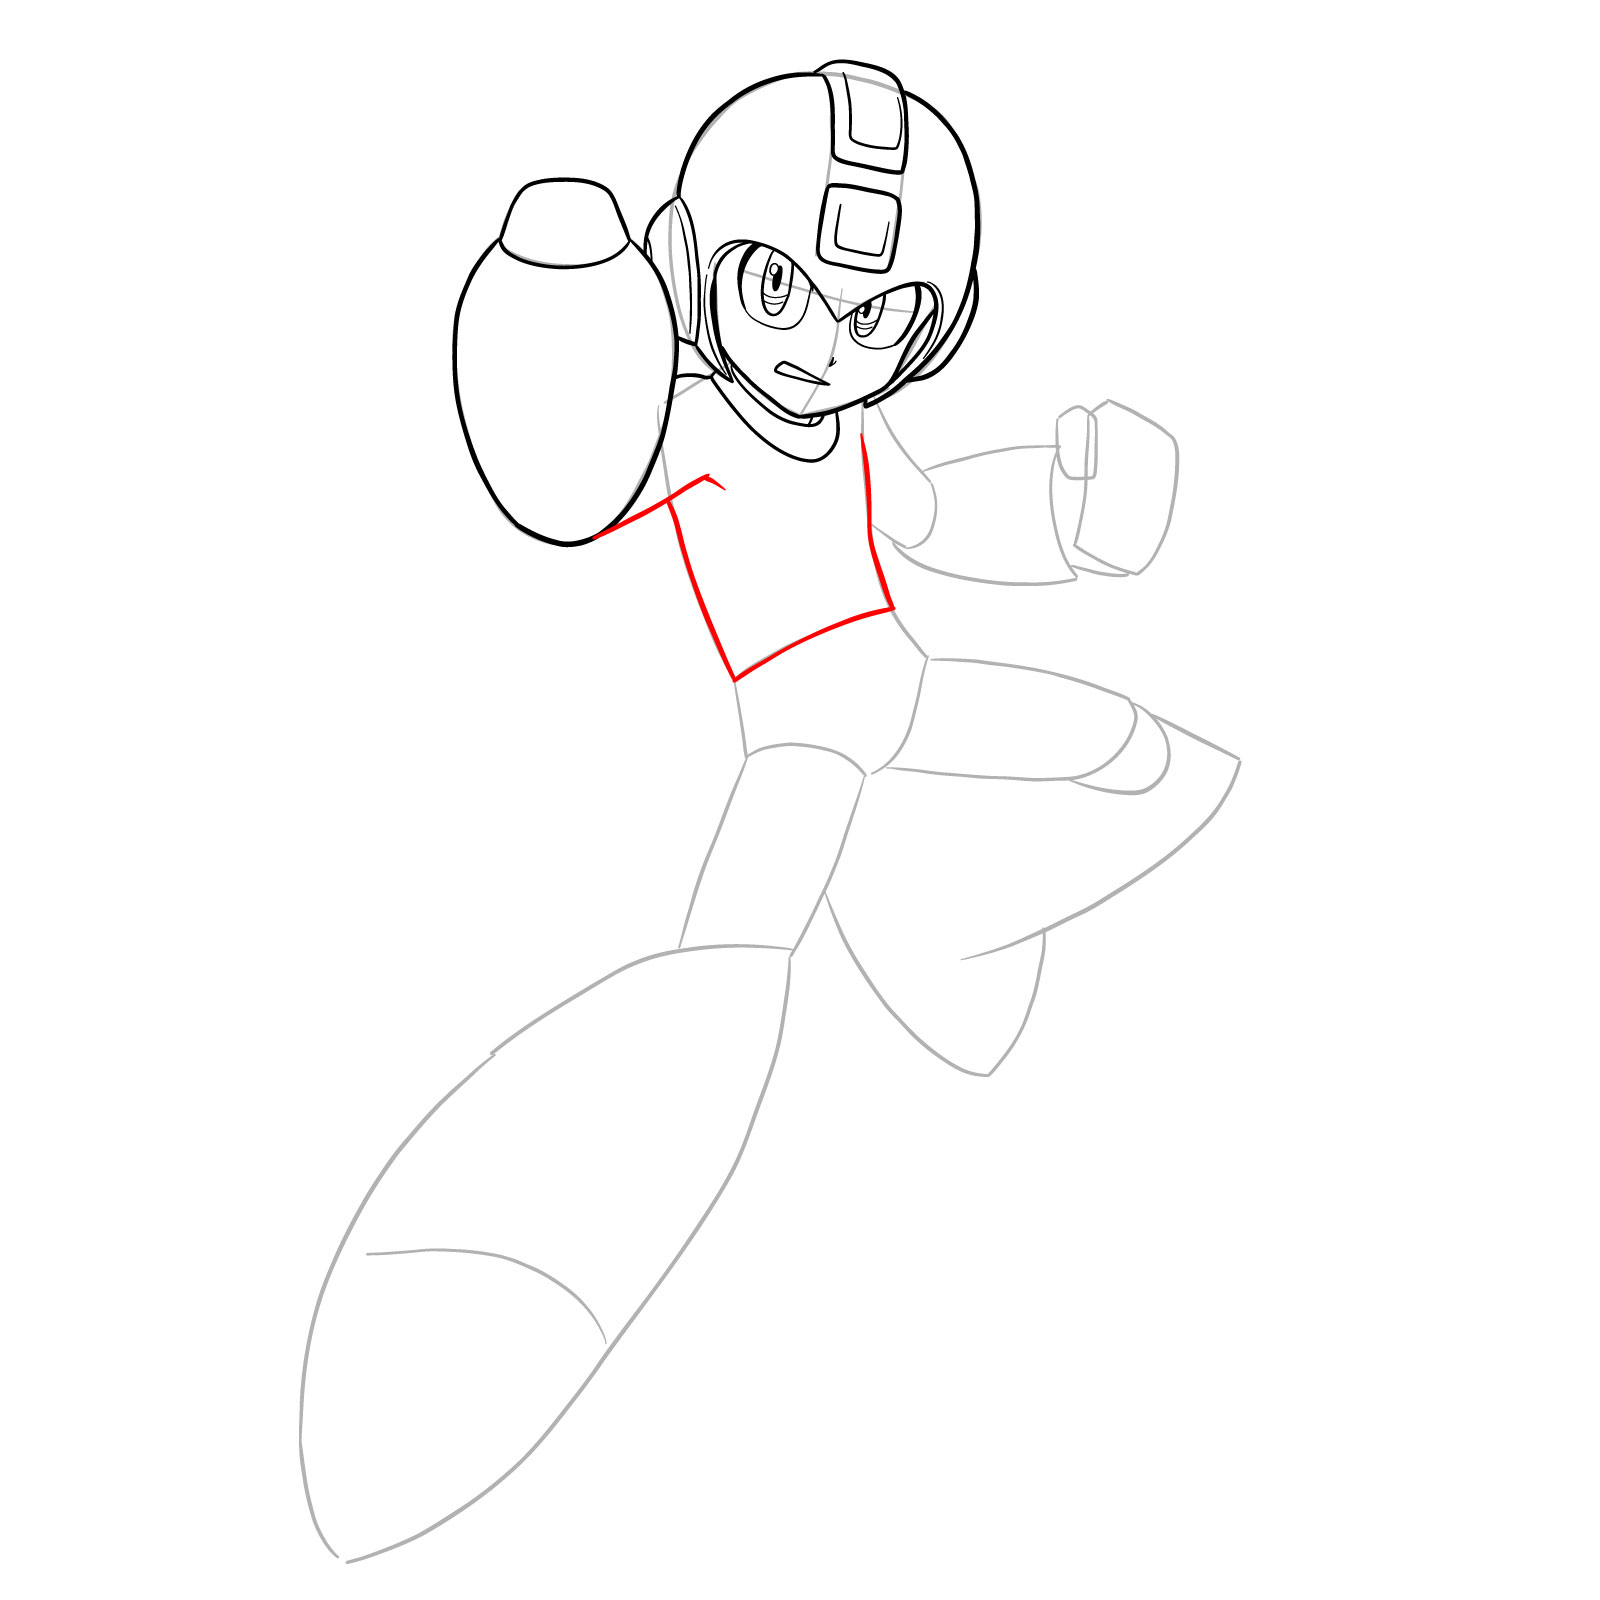 How to draw Mega Man from the 11th game - step 16